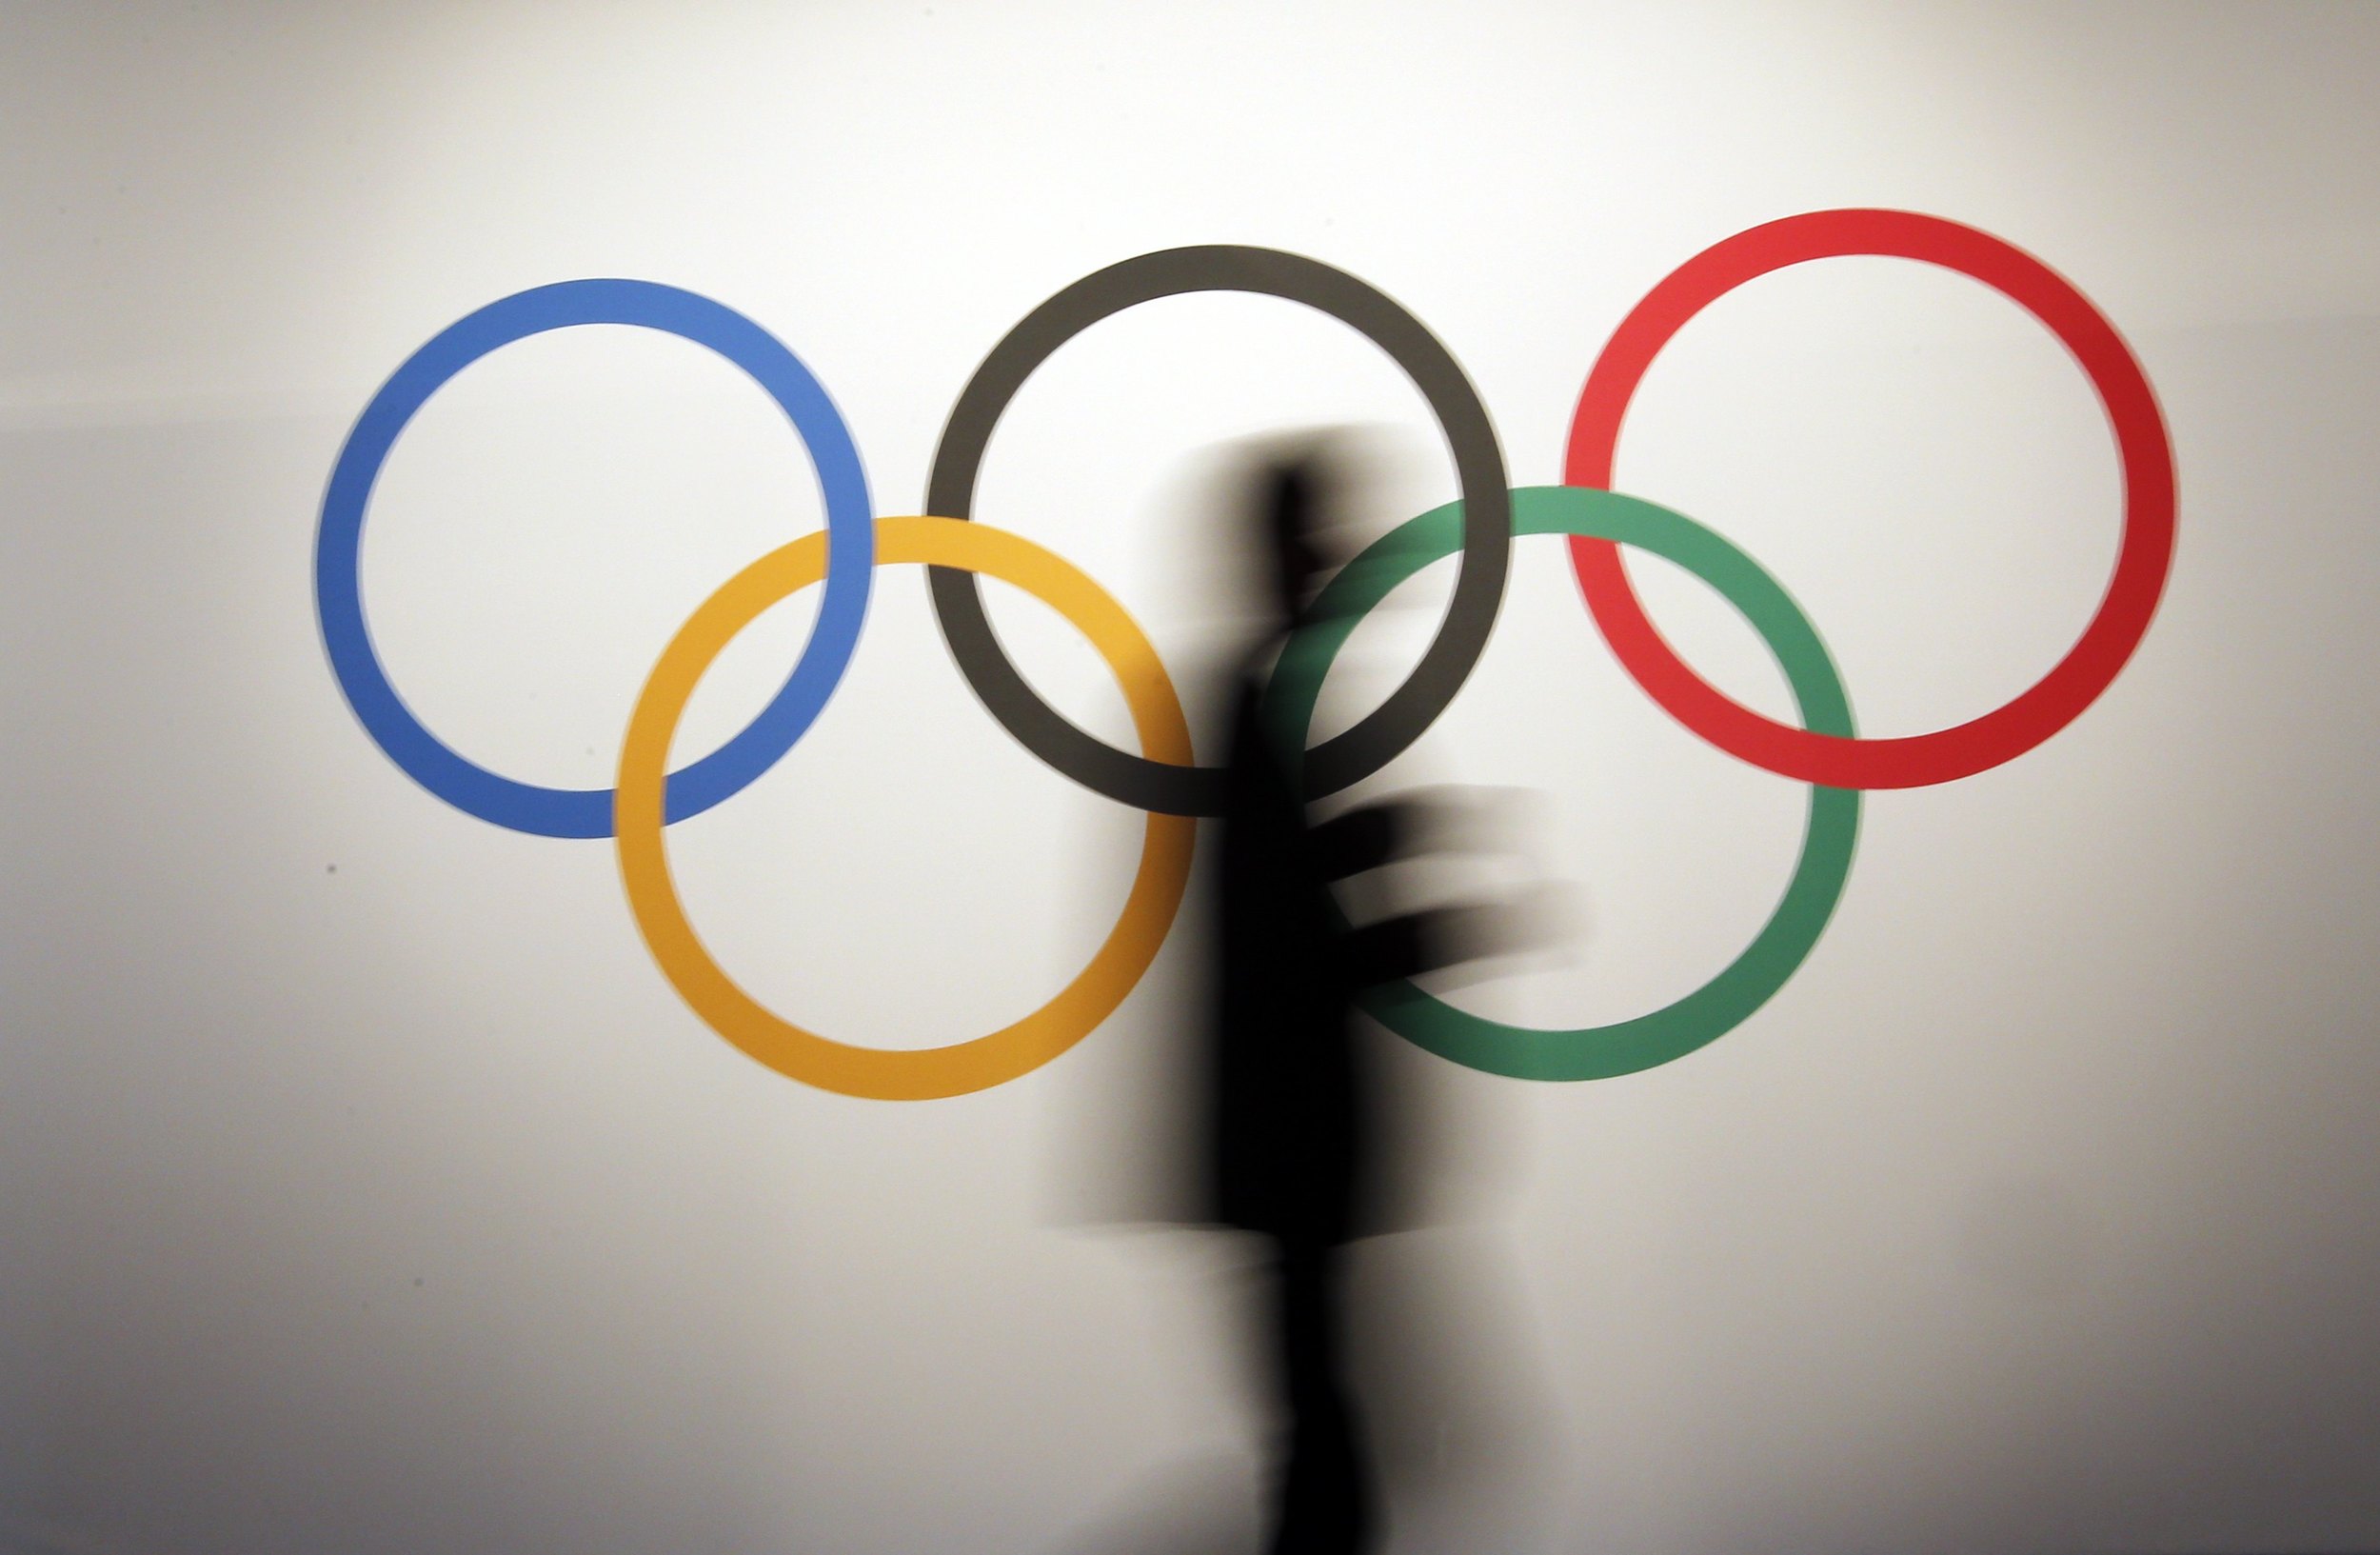 The Evolution of the Olympic Rings